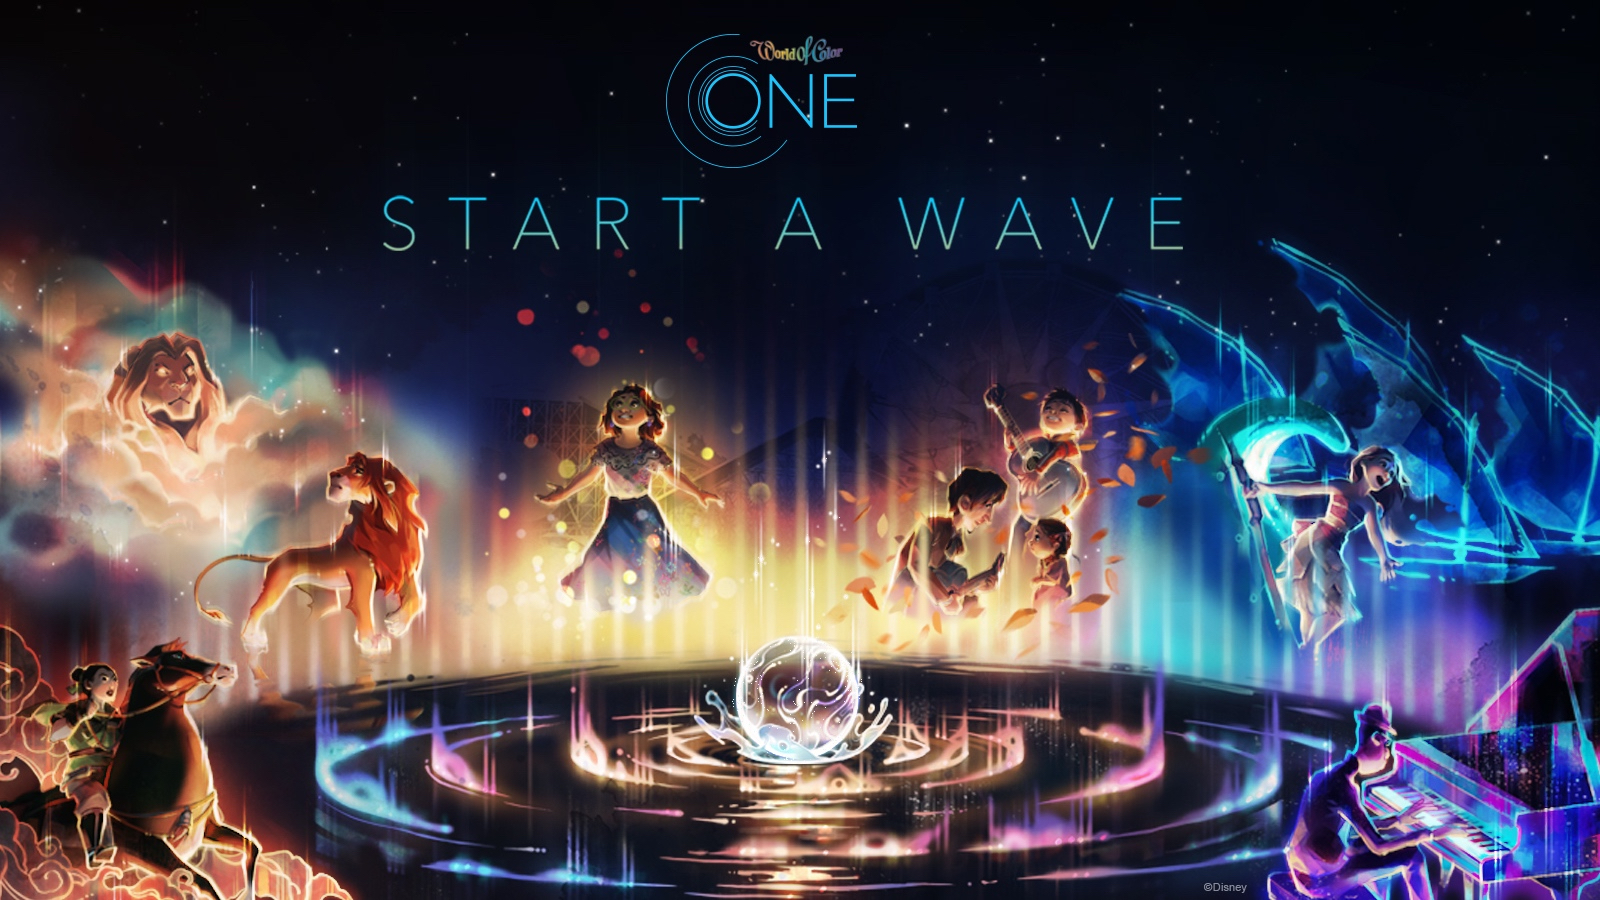 ‘Start a Wave’ From ‘World of Color: ONE’ Heads to Streaming Services